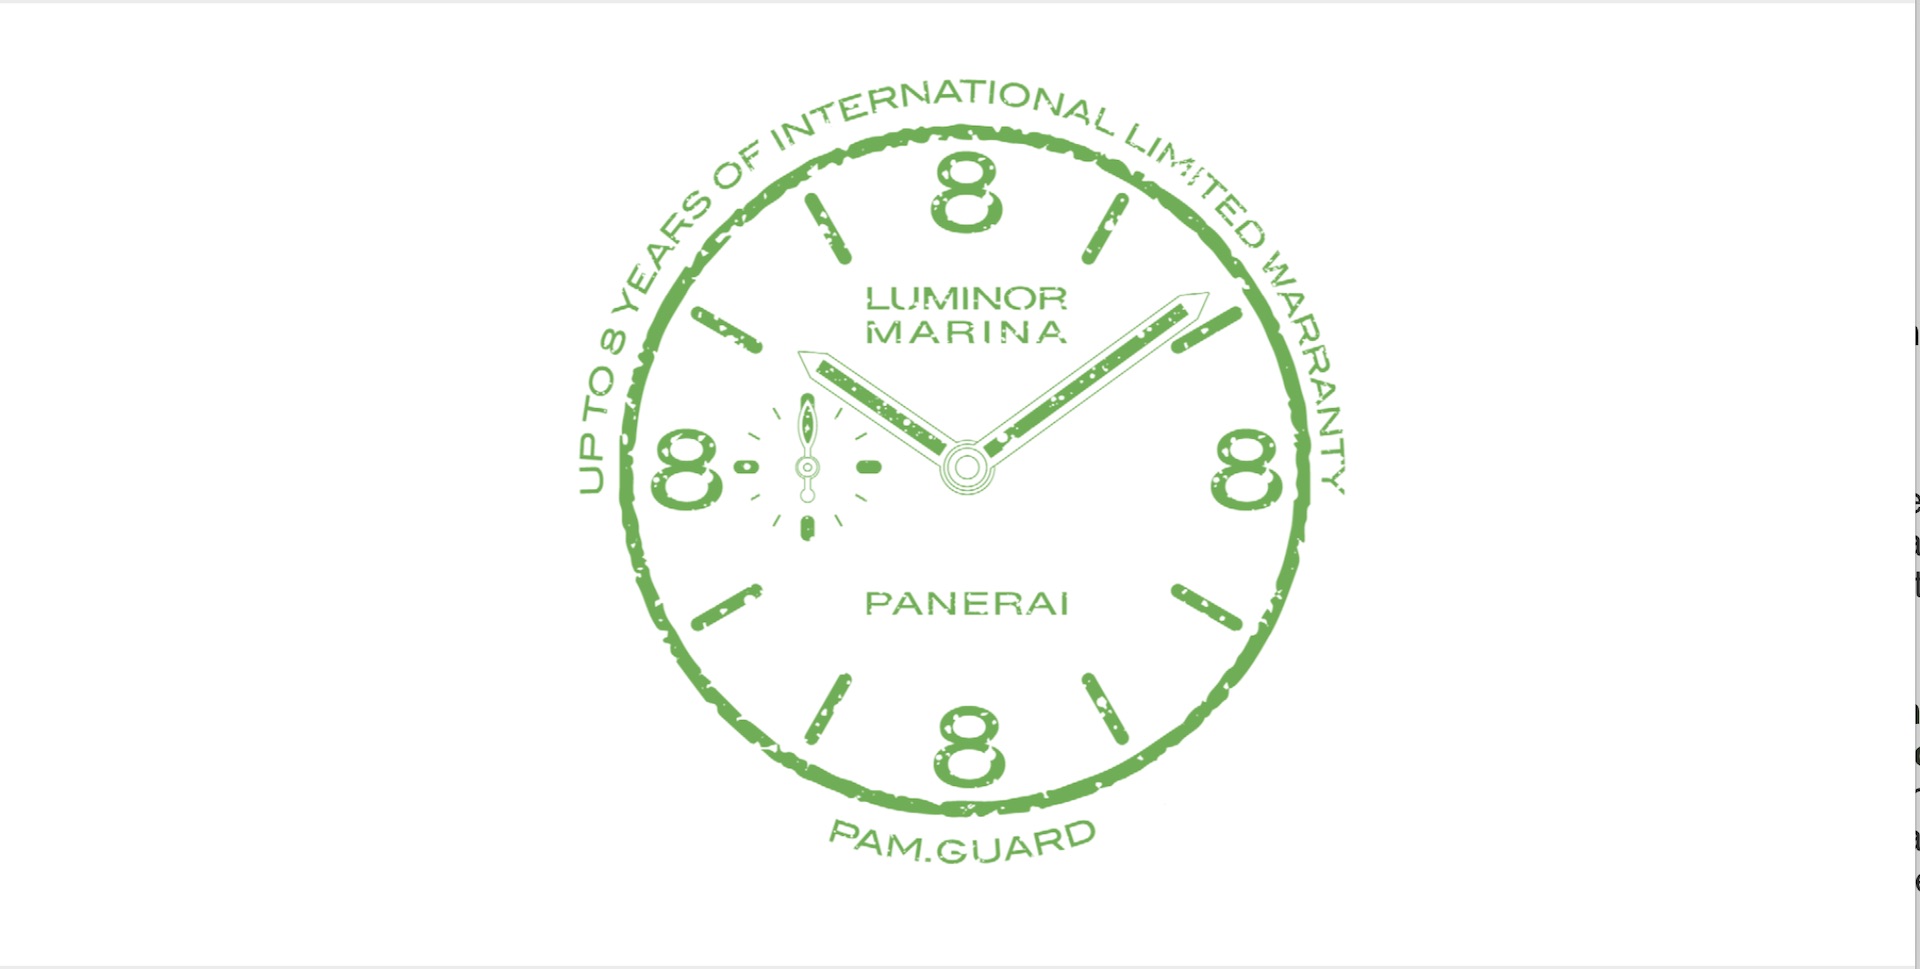 Panerai Launches PAM.Guard Watch Care Program With 8-Year Warranty